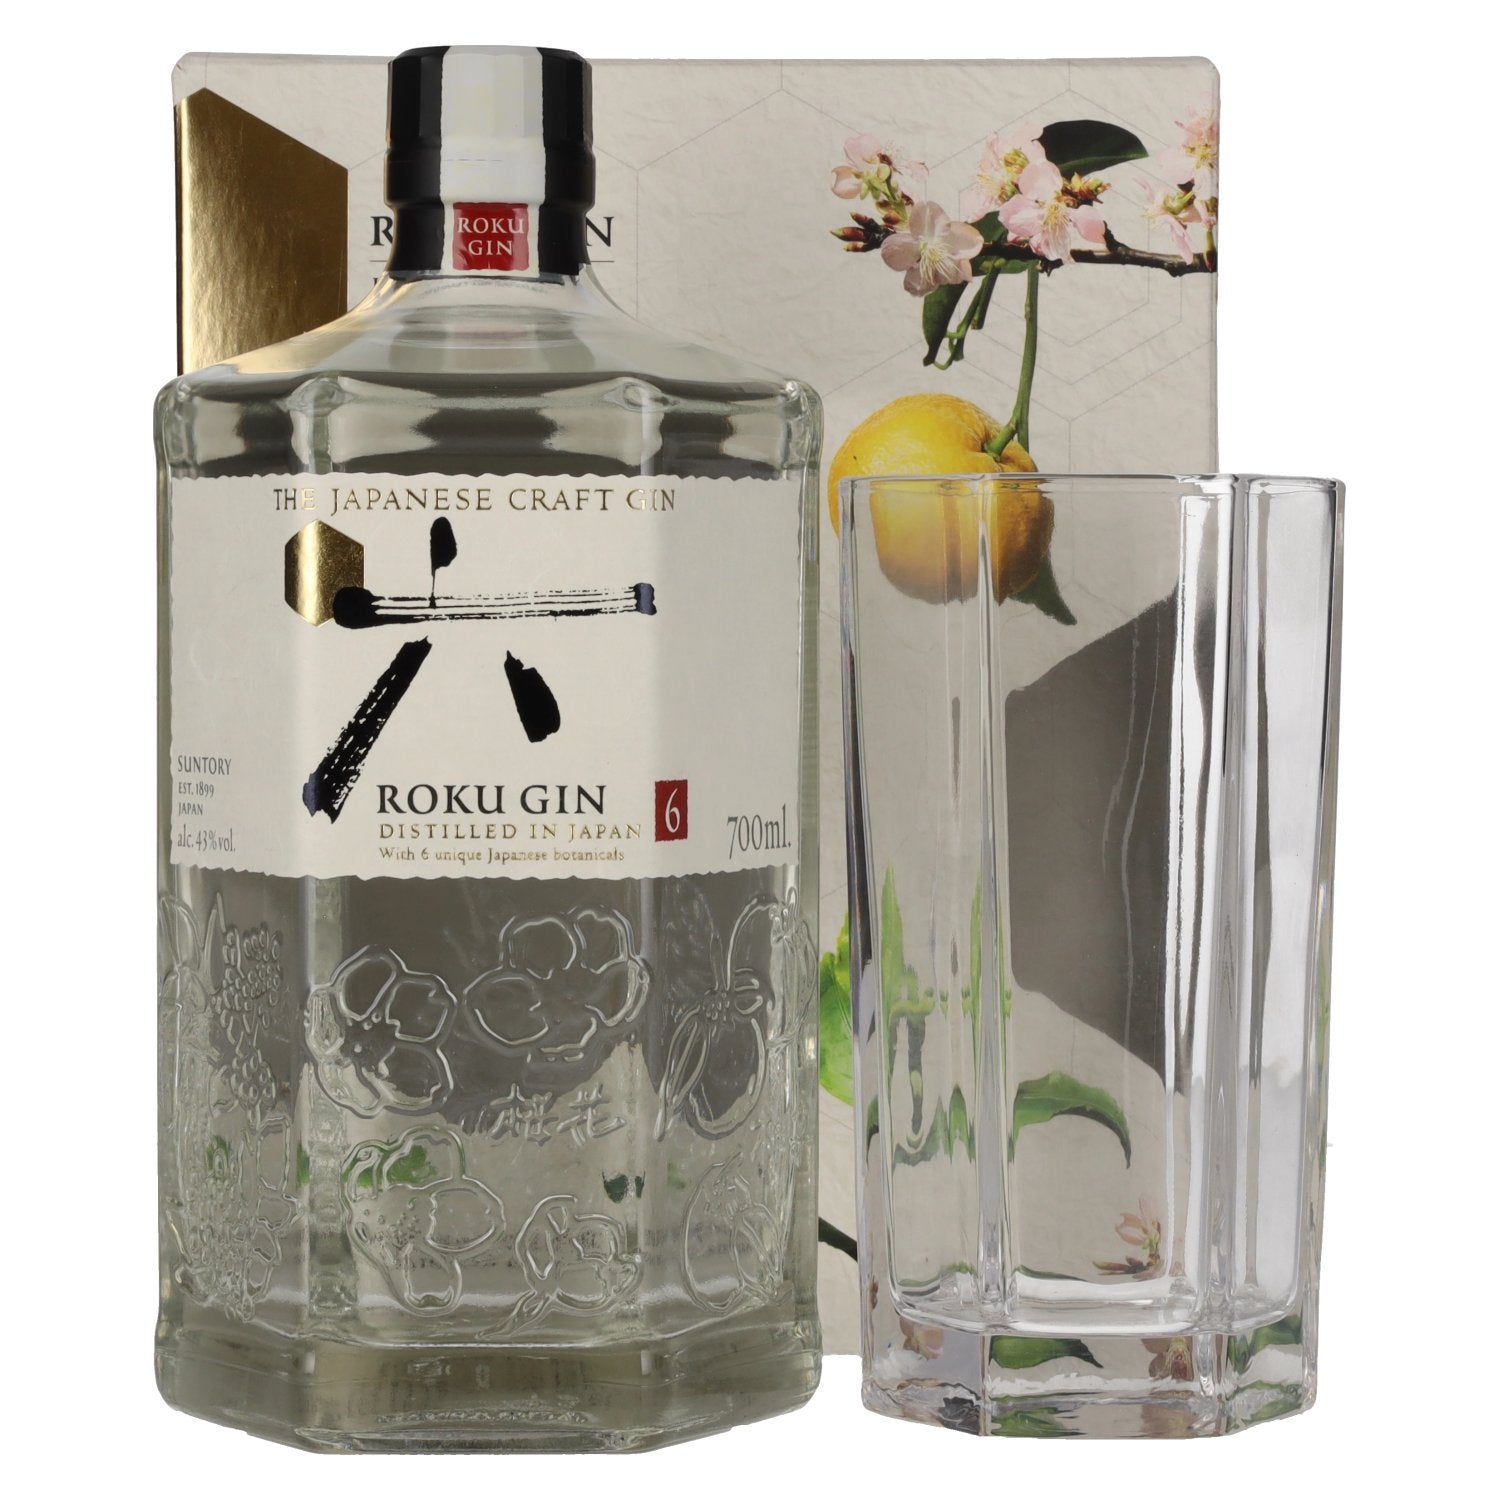 Roku Gin The Japanese Craft Gin 43% Vol. 0,7l in Giftbox with glass